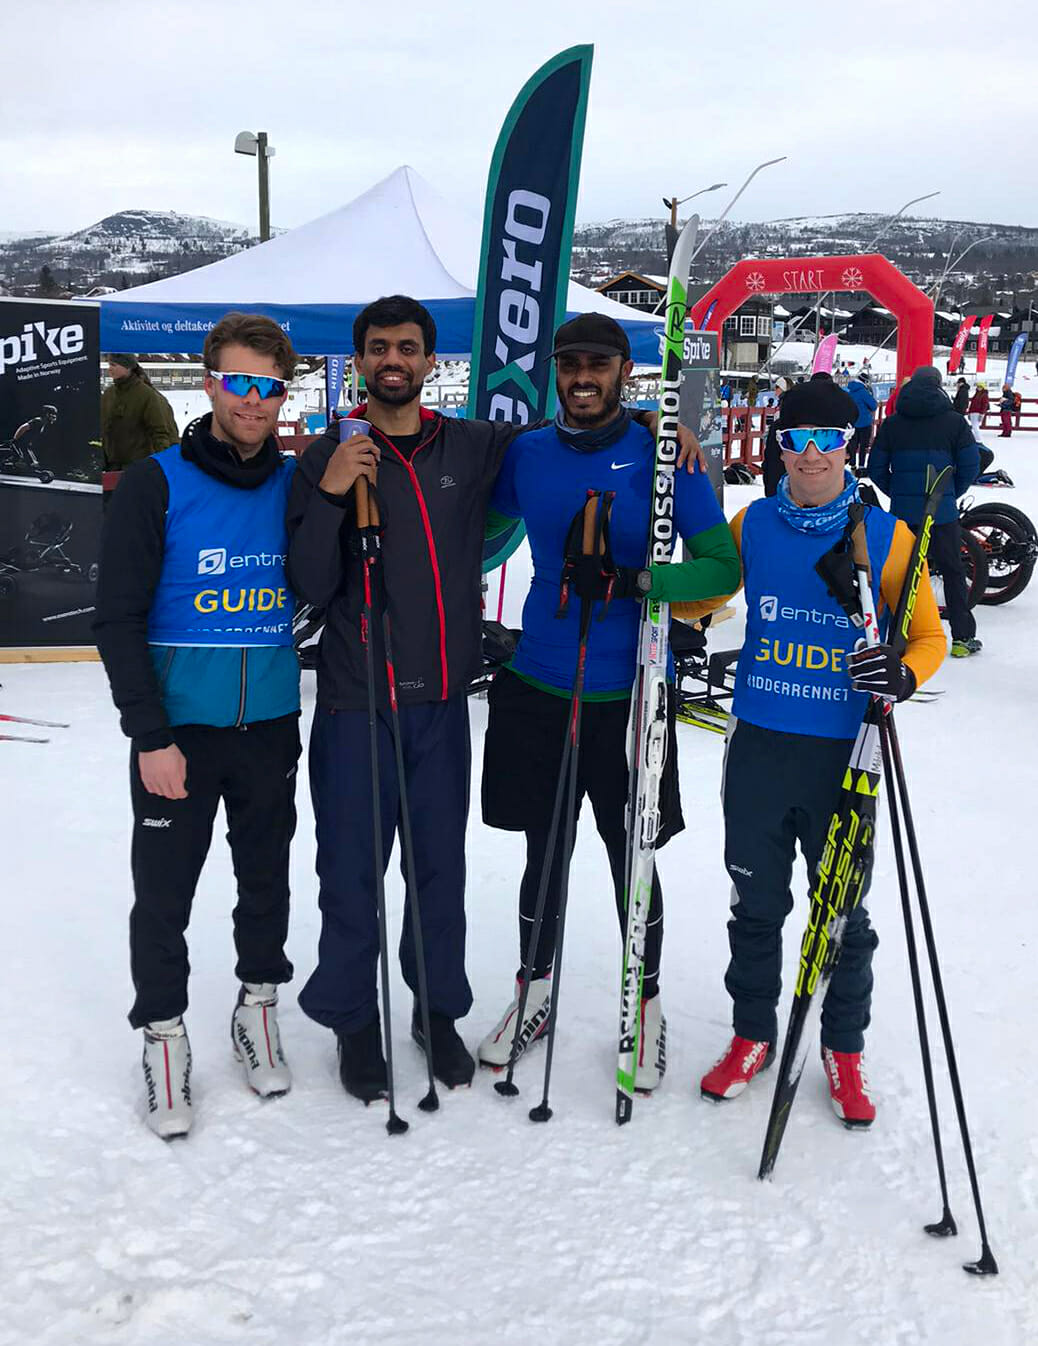 4 skiers posing for the group photo